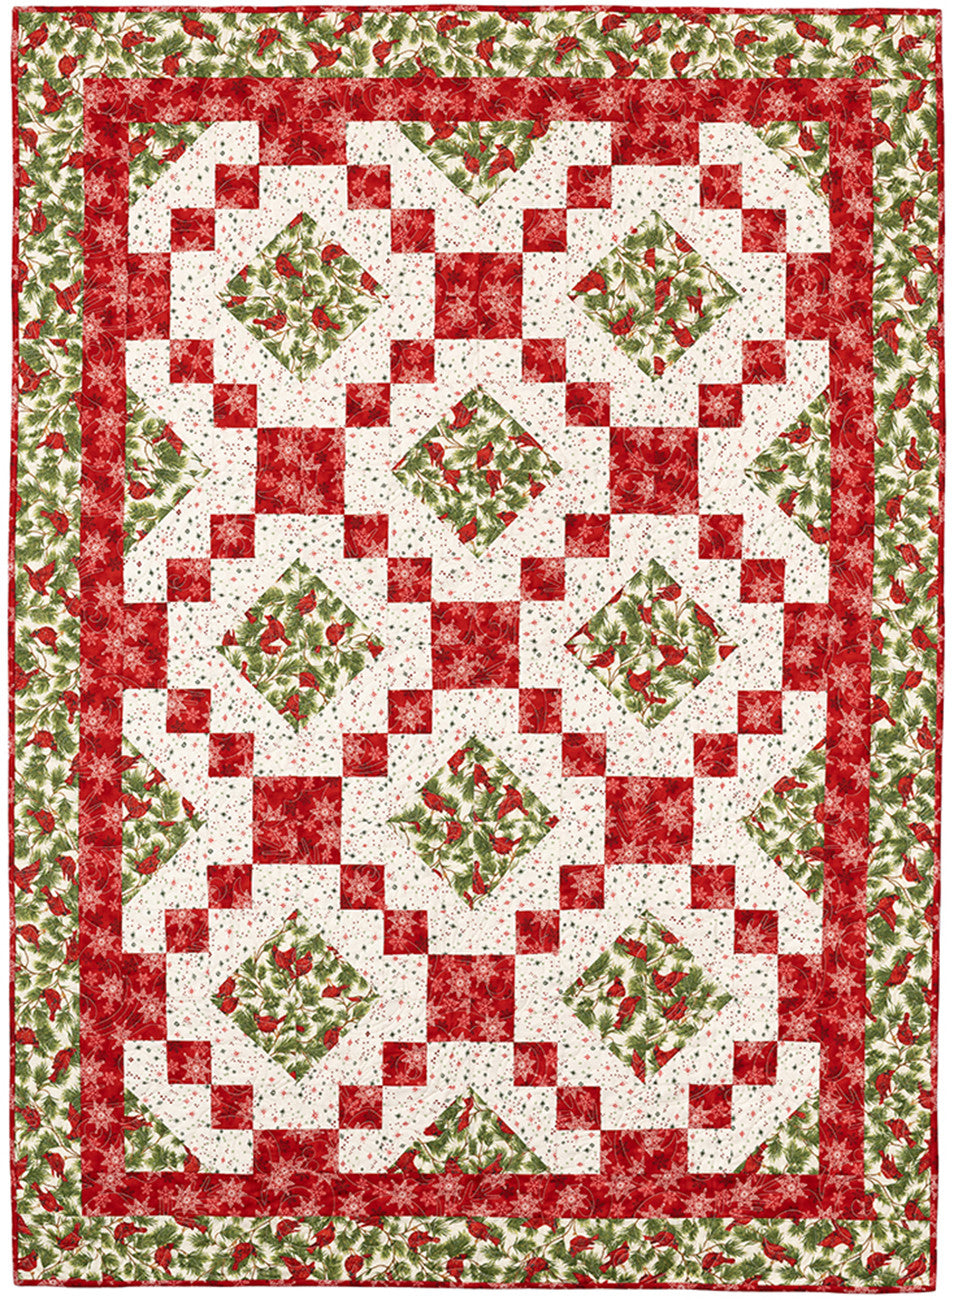 Quick Christmas 3-Yard Quilts # FC032442